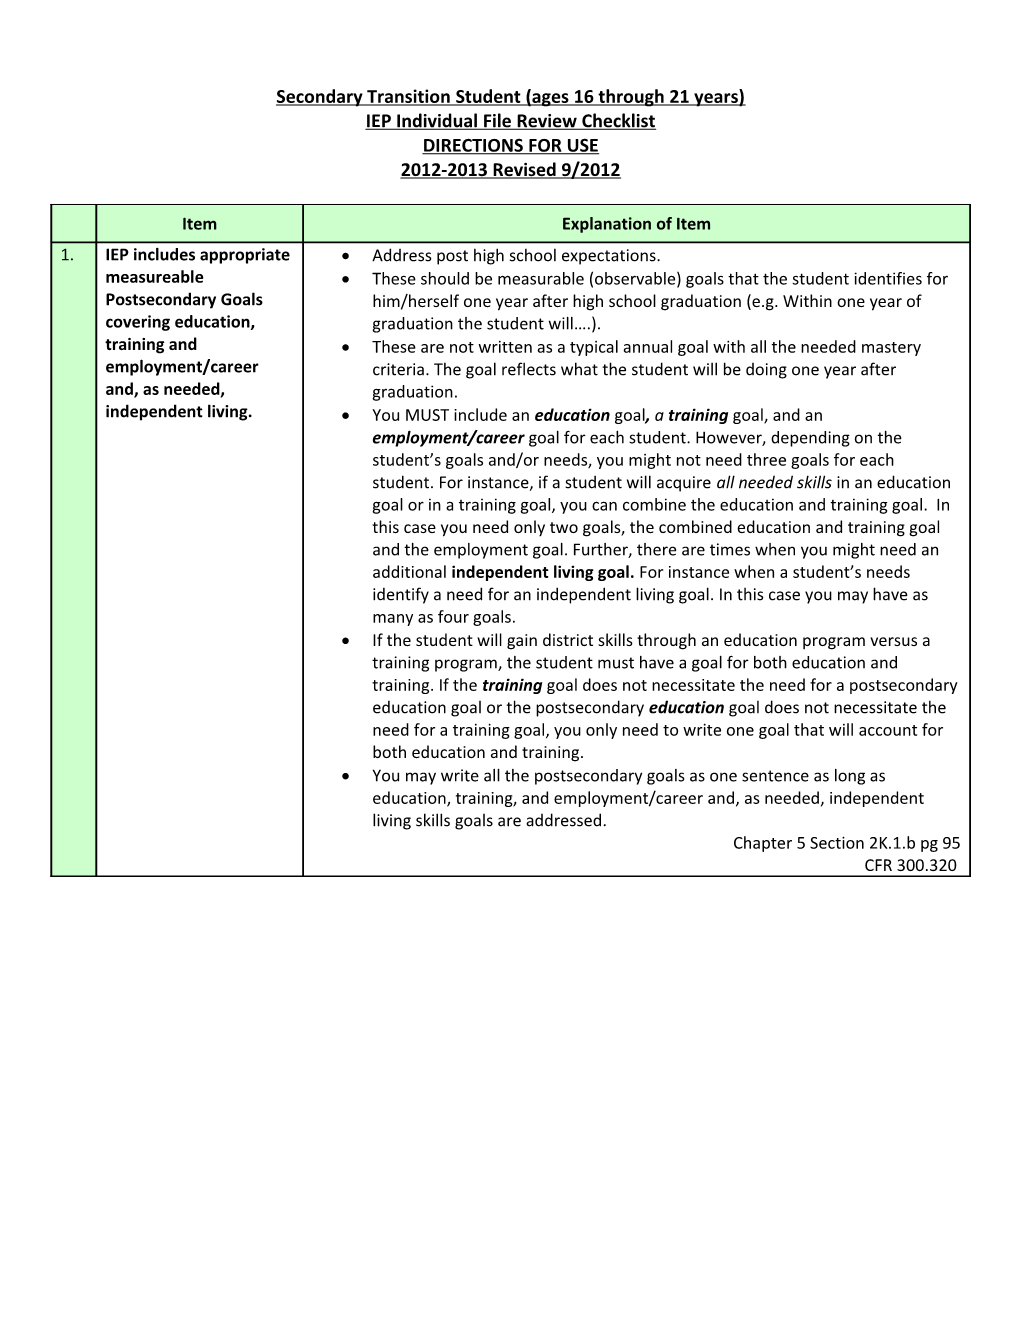 Secondary IEP Content (Ages 16 Though 21 Years)